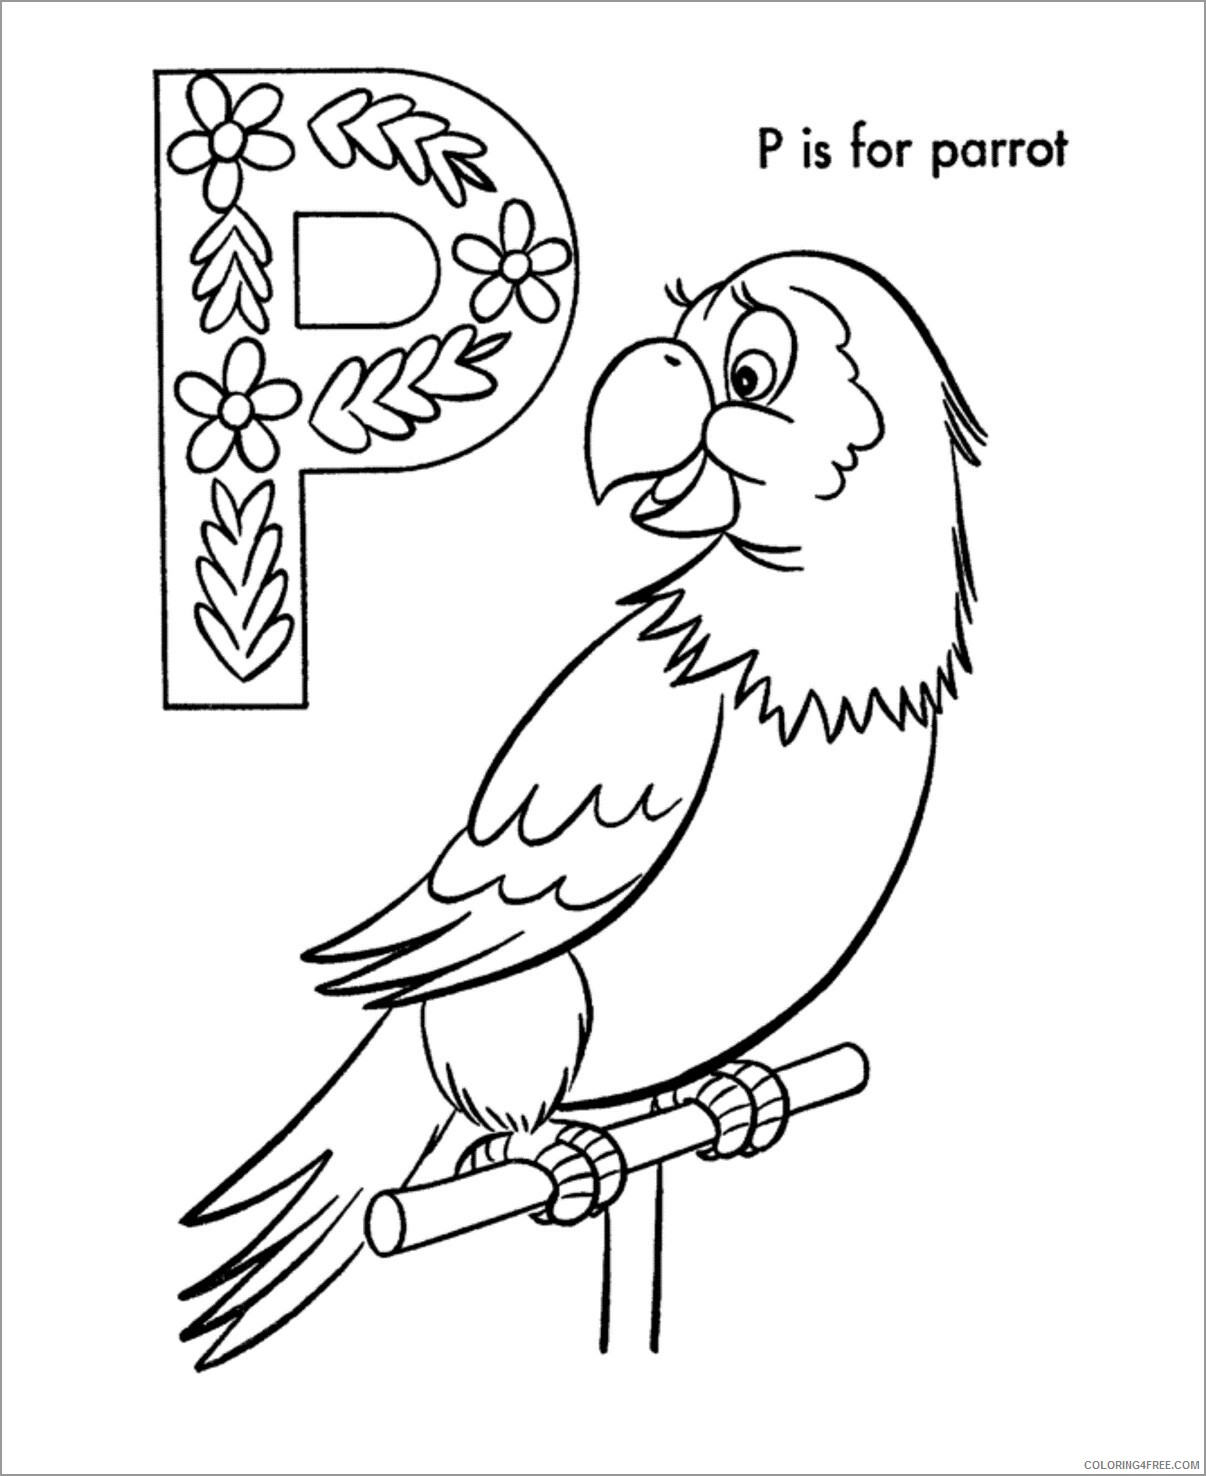 Parrot Coloring Pages Animal Printable Sheets p is for parrot 2021 3735 Coloring4free